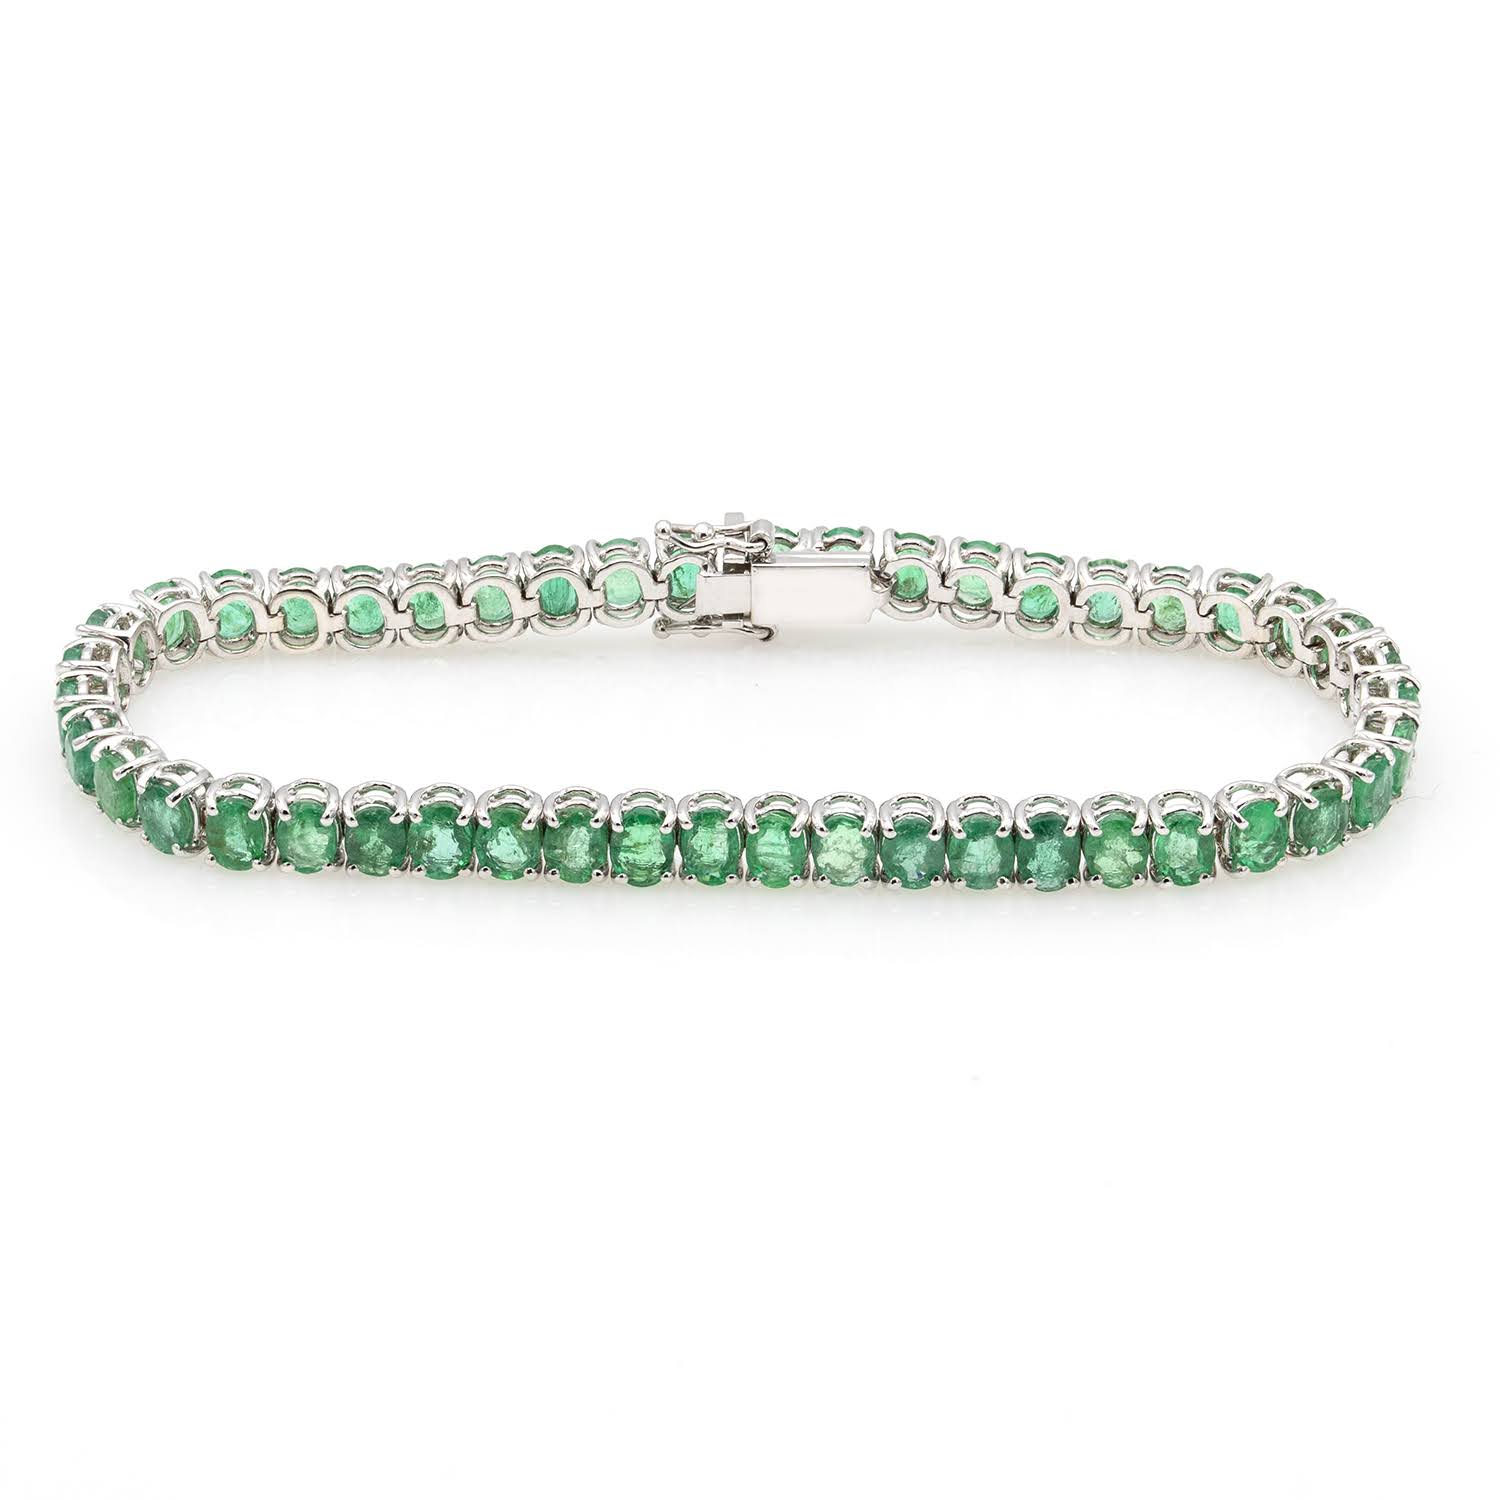 Oval Cut Emerald 13.35ct Bracelet – New York Collection